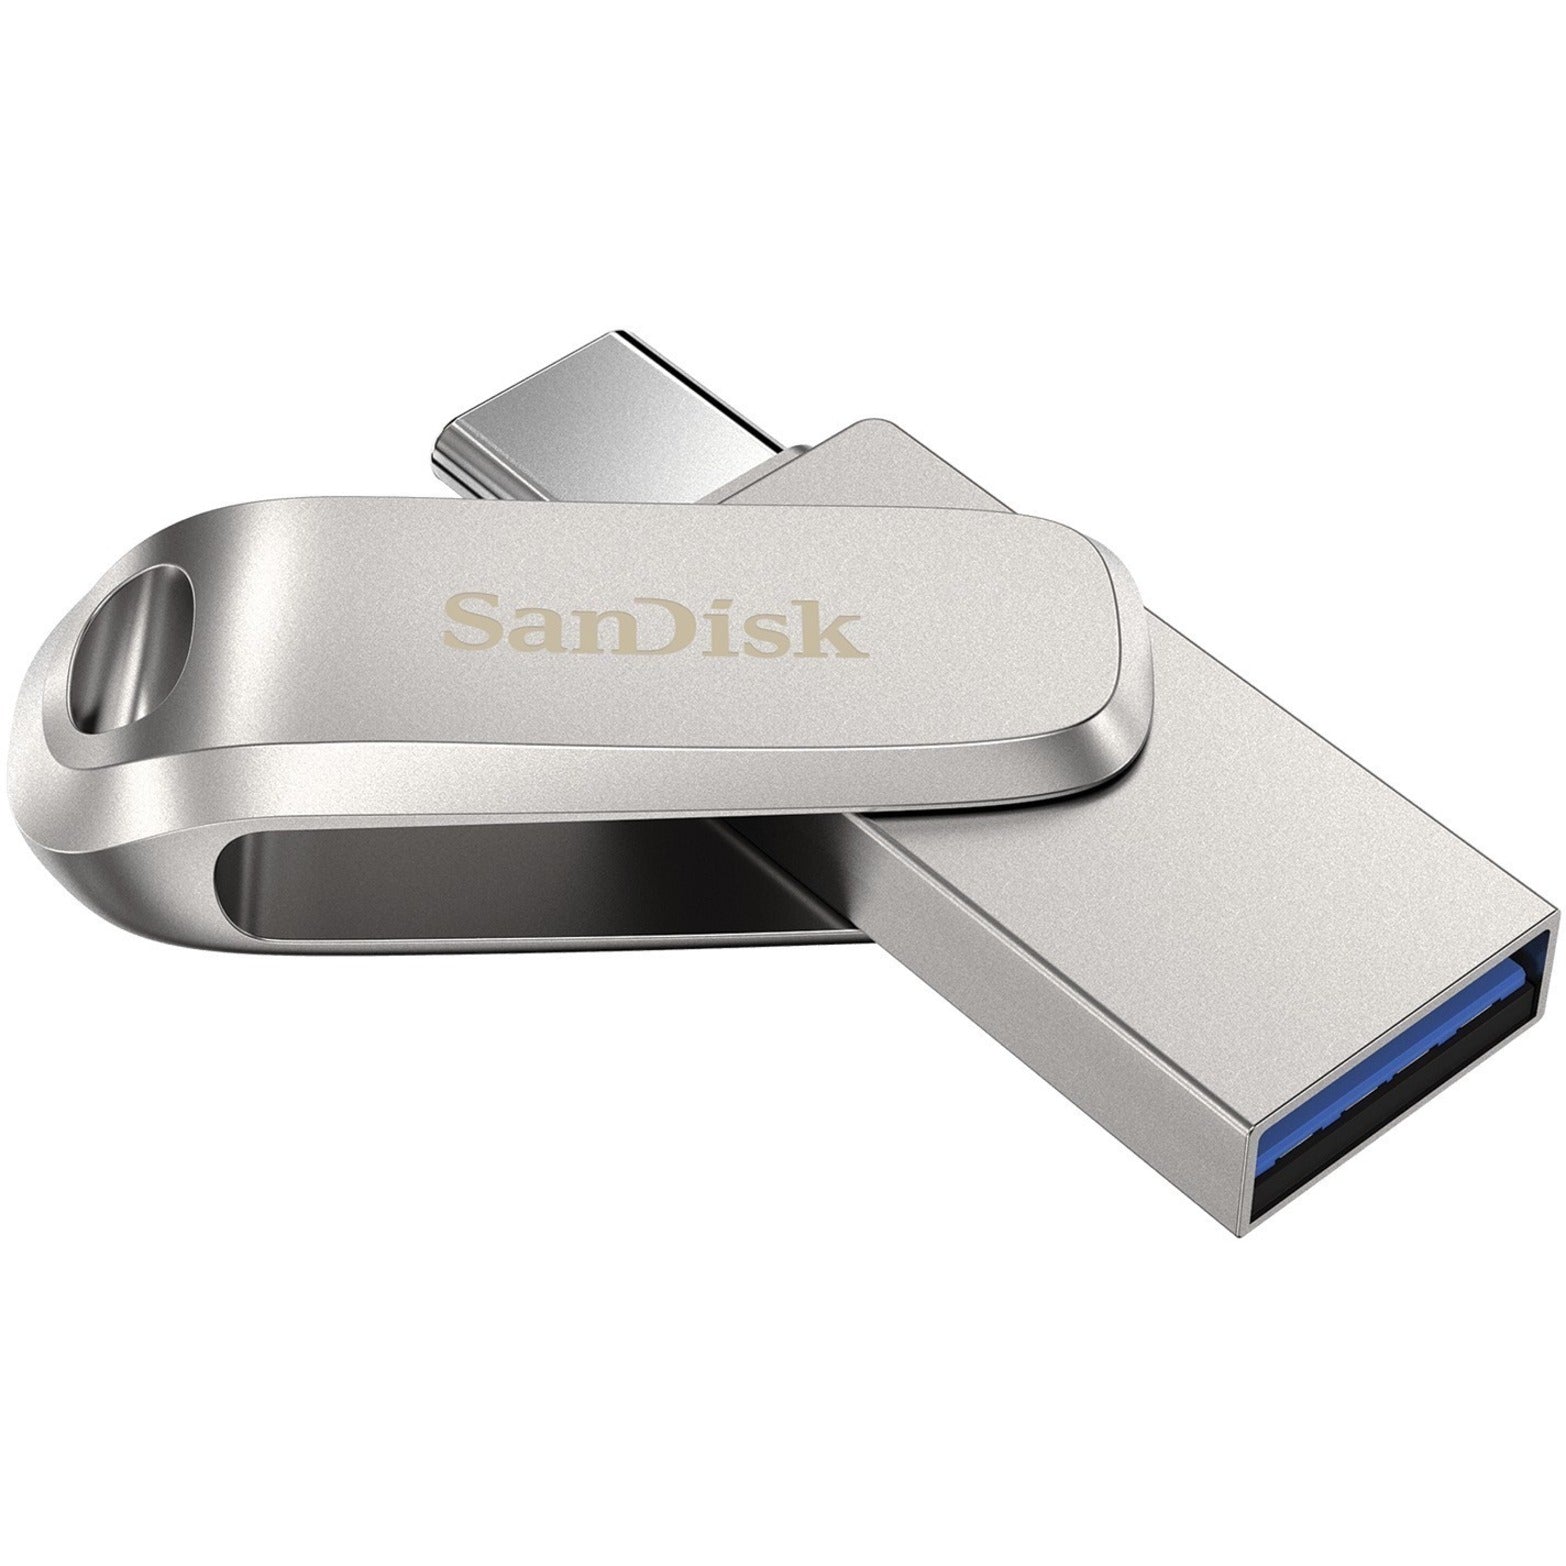 SanDisk SDDDC4-032G-A46 Ultra Dual Drive Luxe USB TYPE-C - 32GB High-Speed Data Transfer and Storage